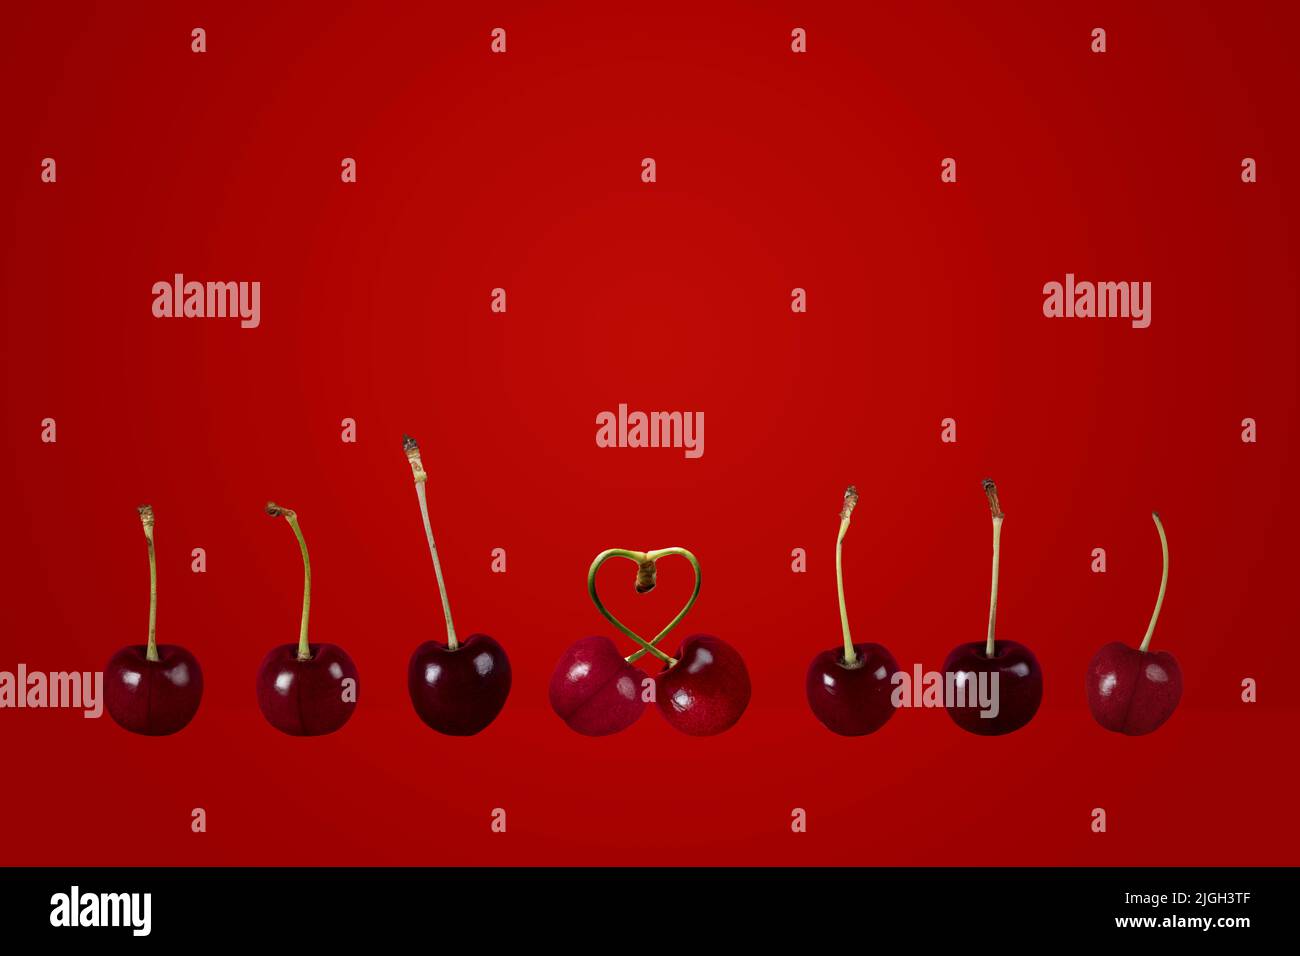 single couple concept row of ripe cherries pair heart cherries fruit on a colorful colourful red background Stock Photo